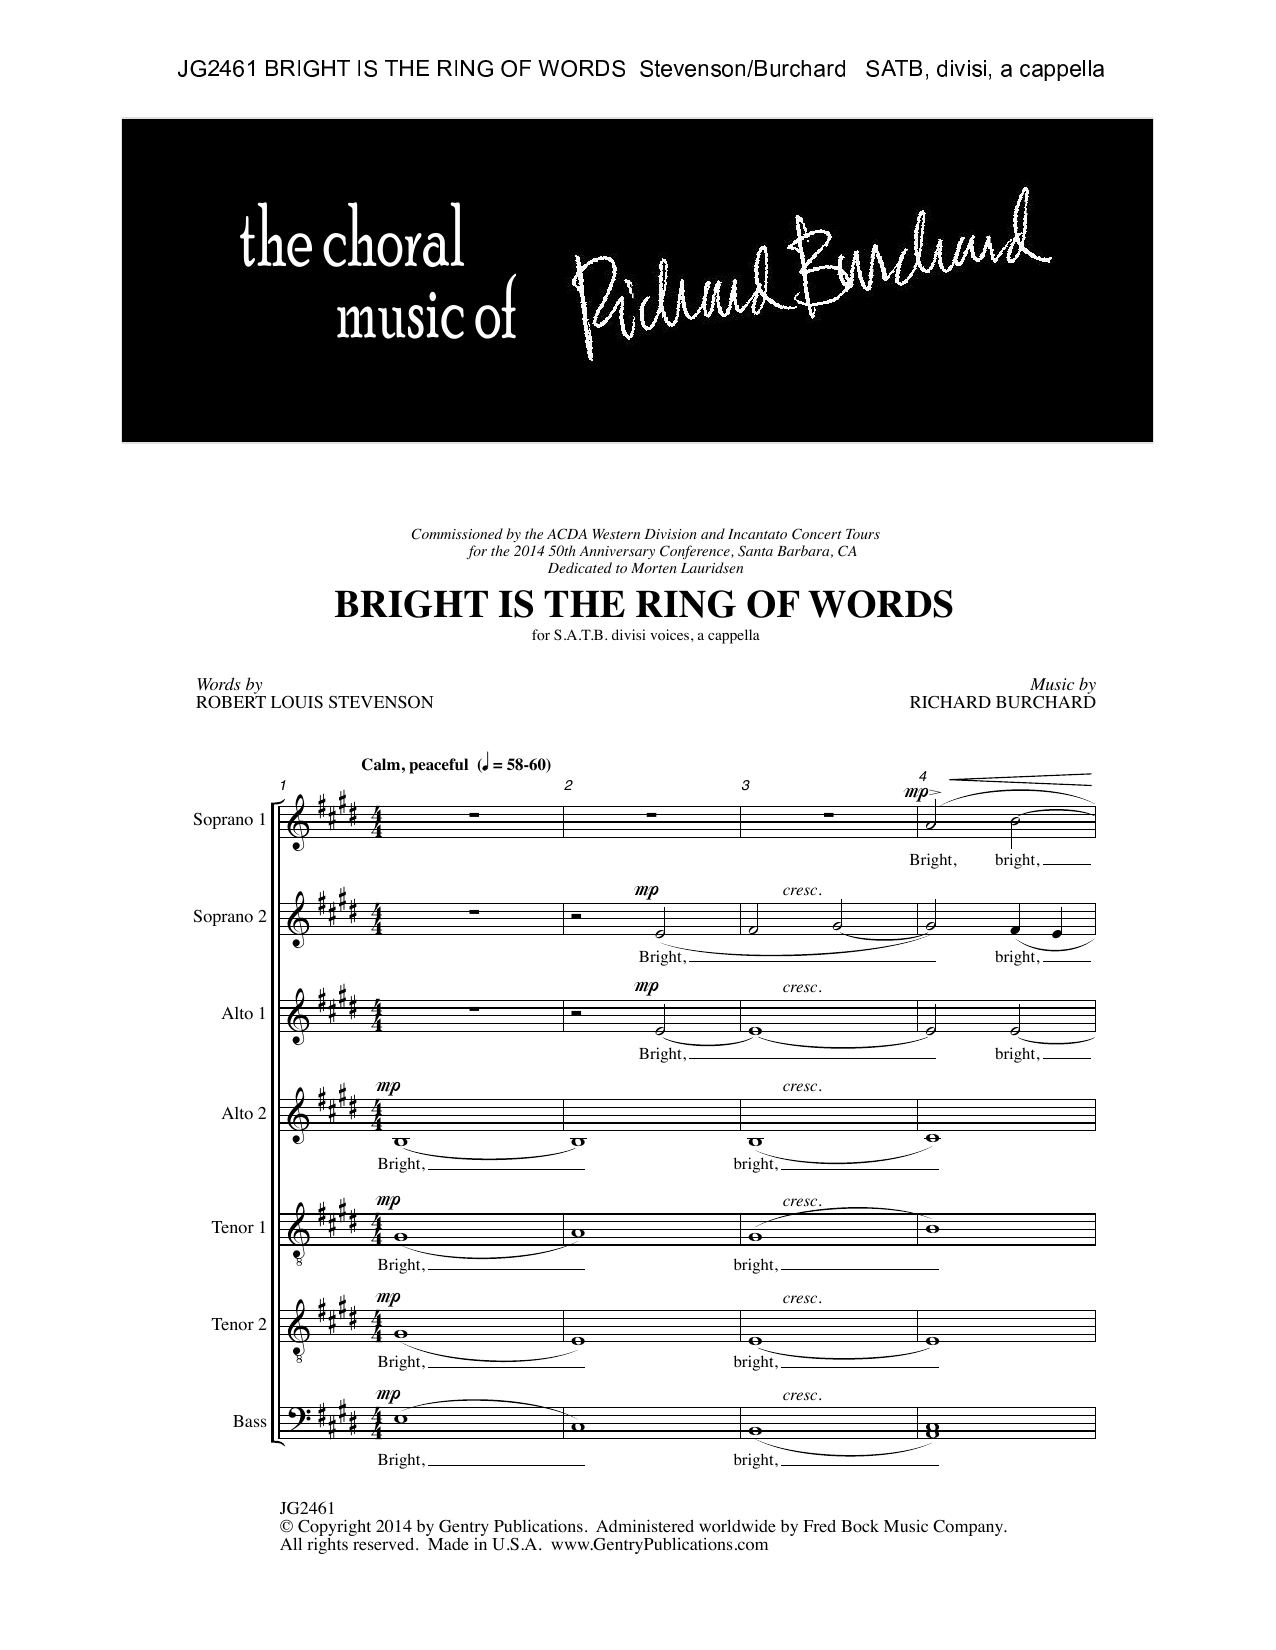 Download Richard Burchard Bright Is the Ring of Words Sheet Music